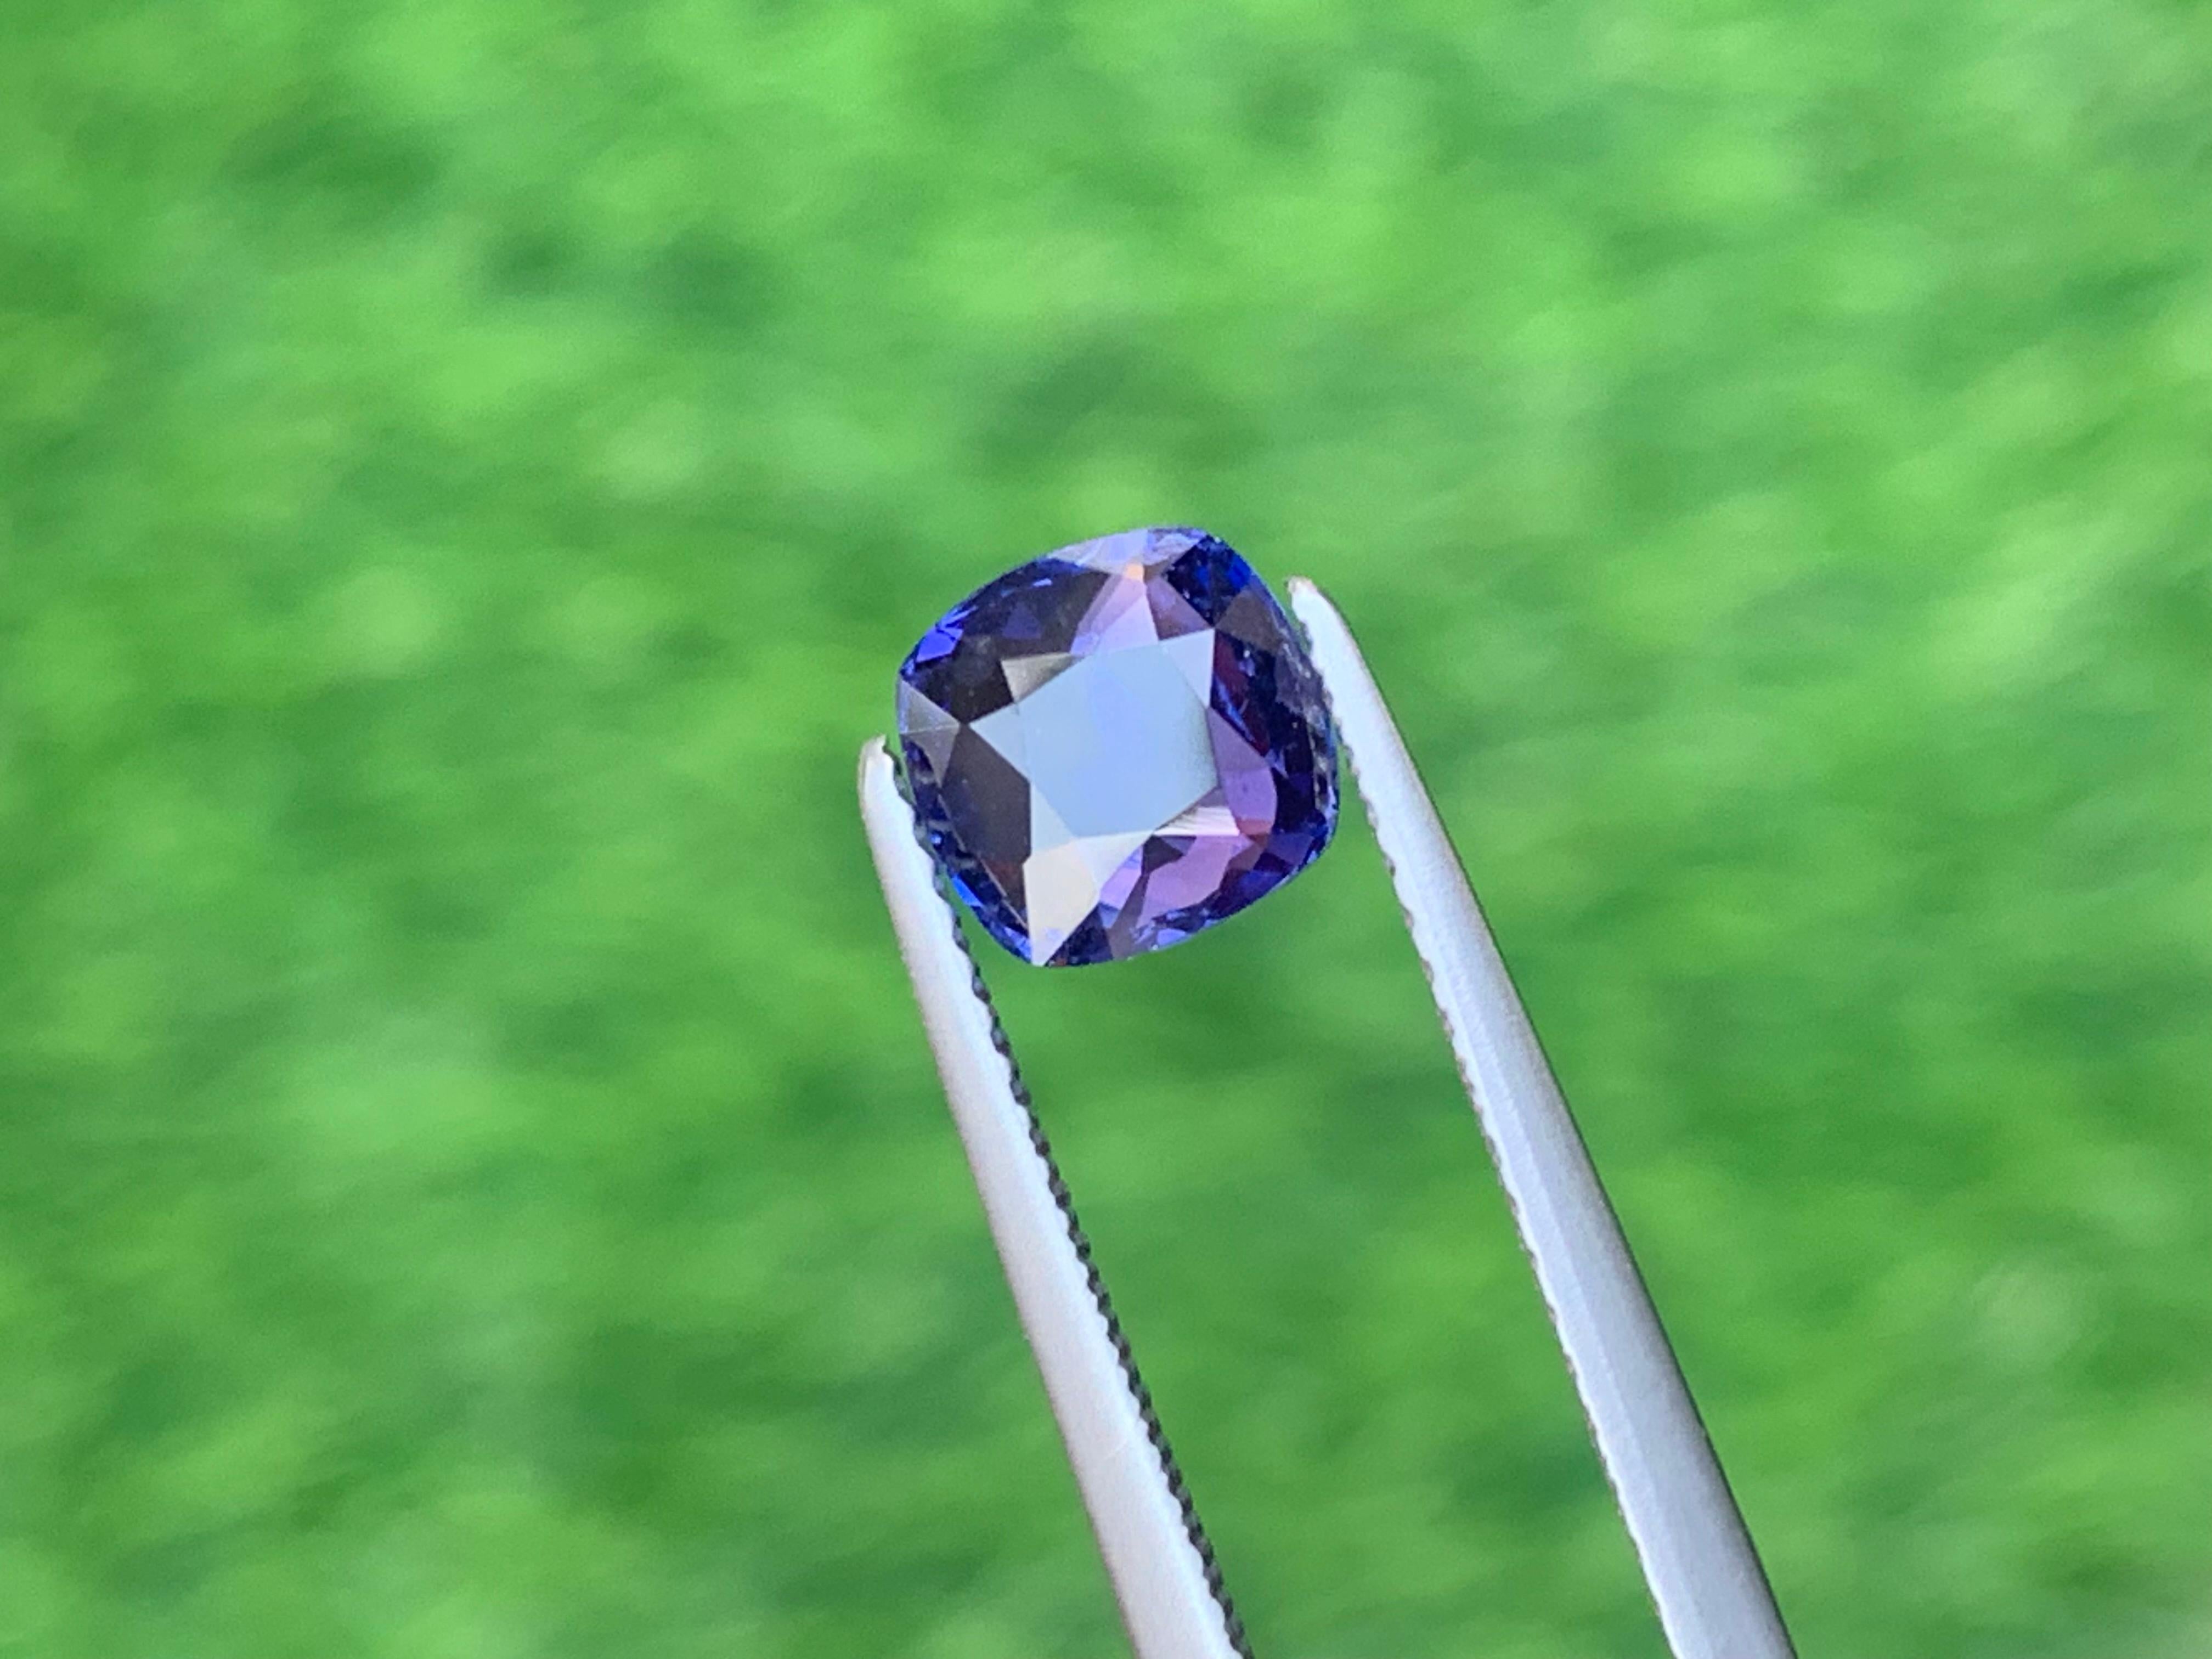 Stunning Blue Sapphire
Weight: 1.58 Carats
Dimension: 6.62x6.48x3.56 Mm
Origin: Srilanka
Shape: Cushion
Color: Blue
Treatment: Non
Certificate: Available
.
Sapphires are known as the stones of wisdom and serenity. They are used to release mental